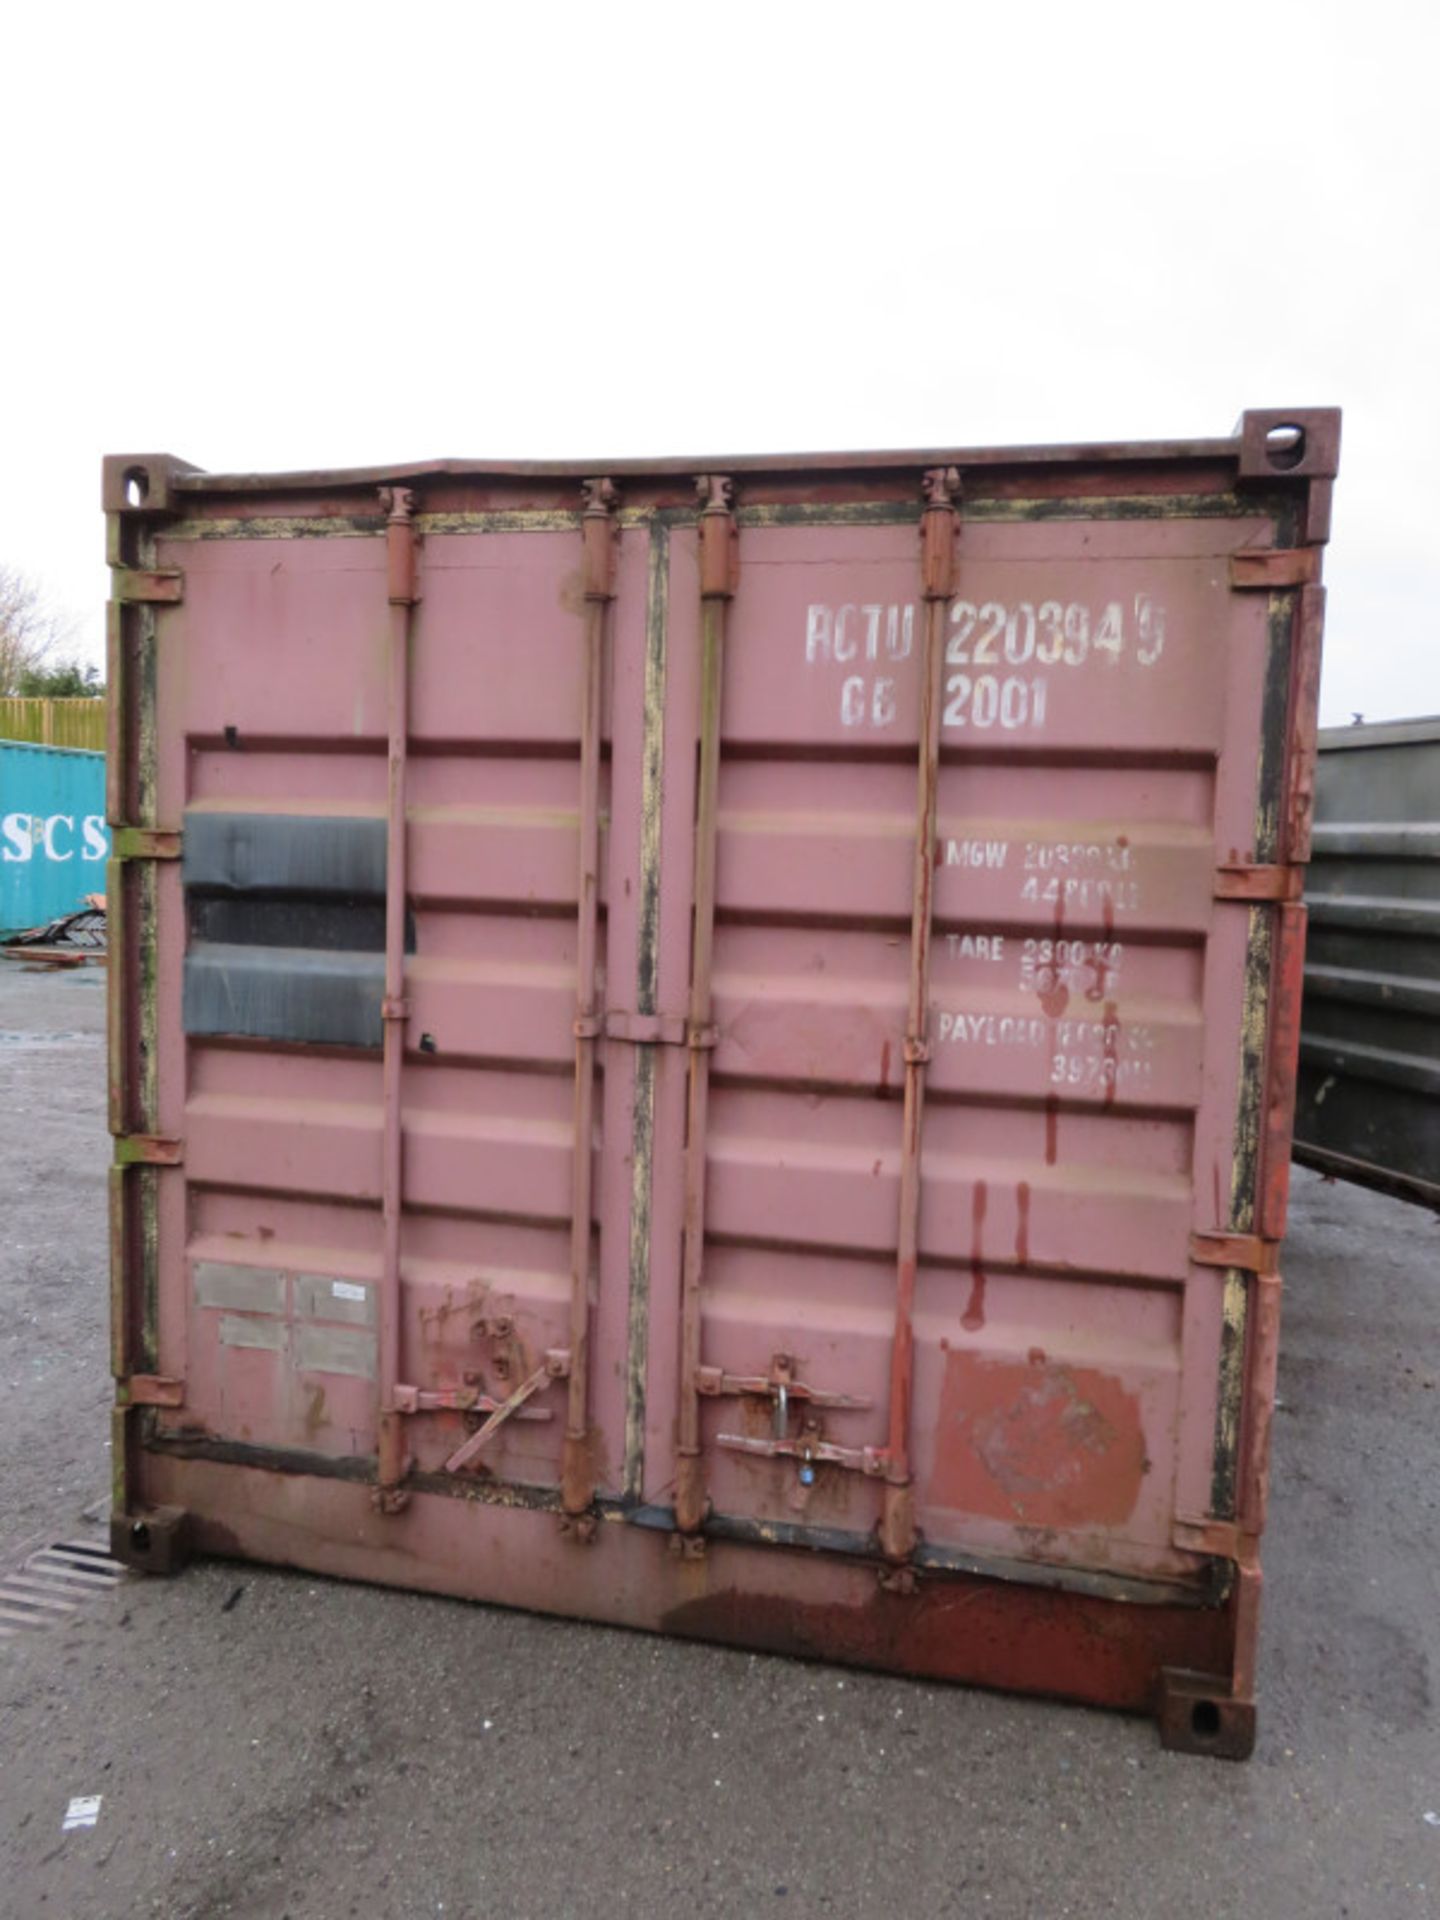 20ft Side and end opening Iso container - 8ft x 8ft x 20ft External Dimensions (Rust marks - Image 4 of 7